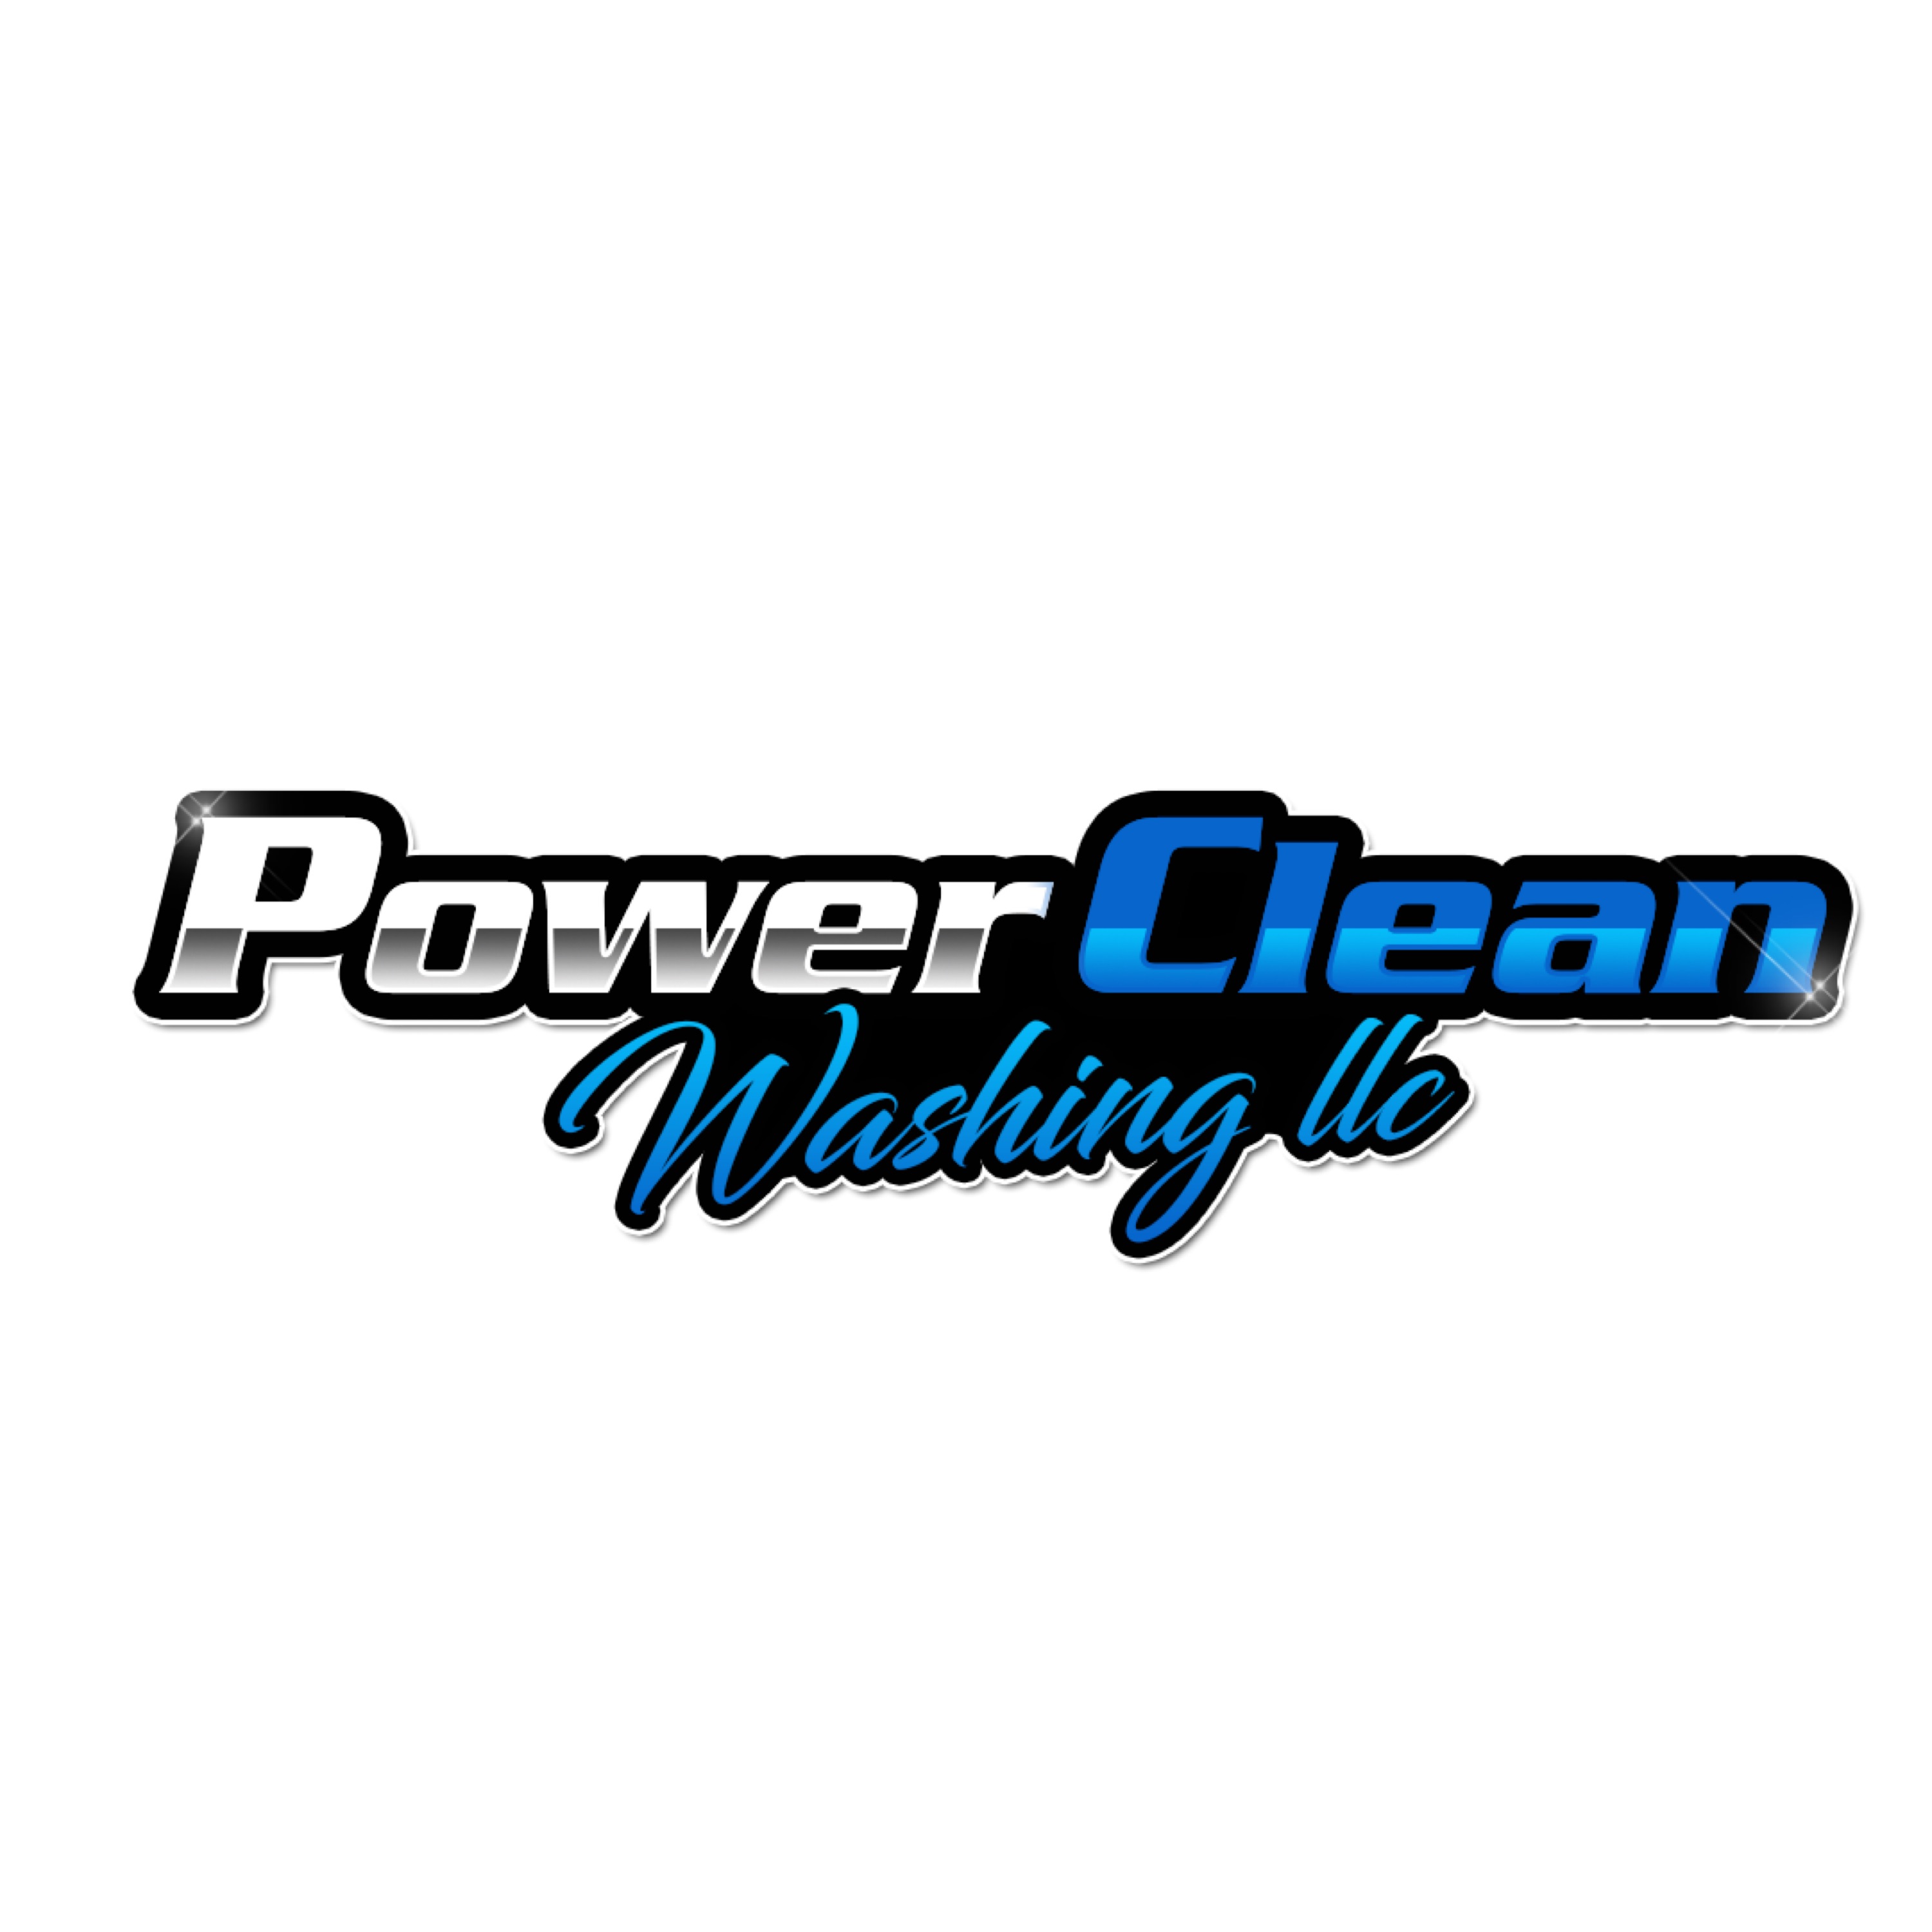 Power Clean Washing - Unlicensed Contractor Logo